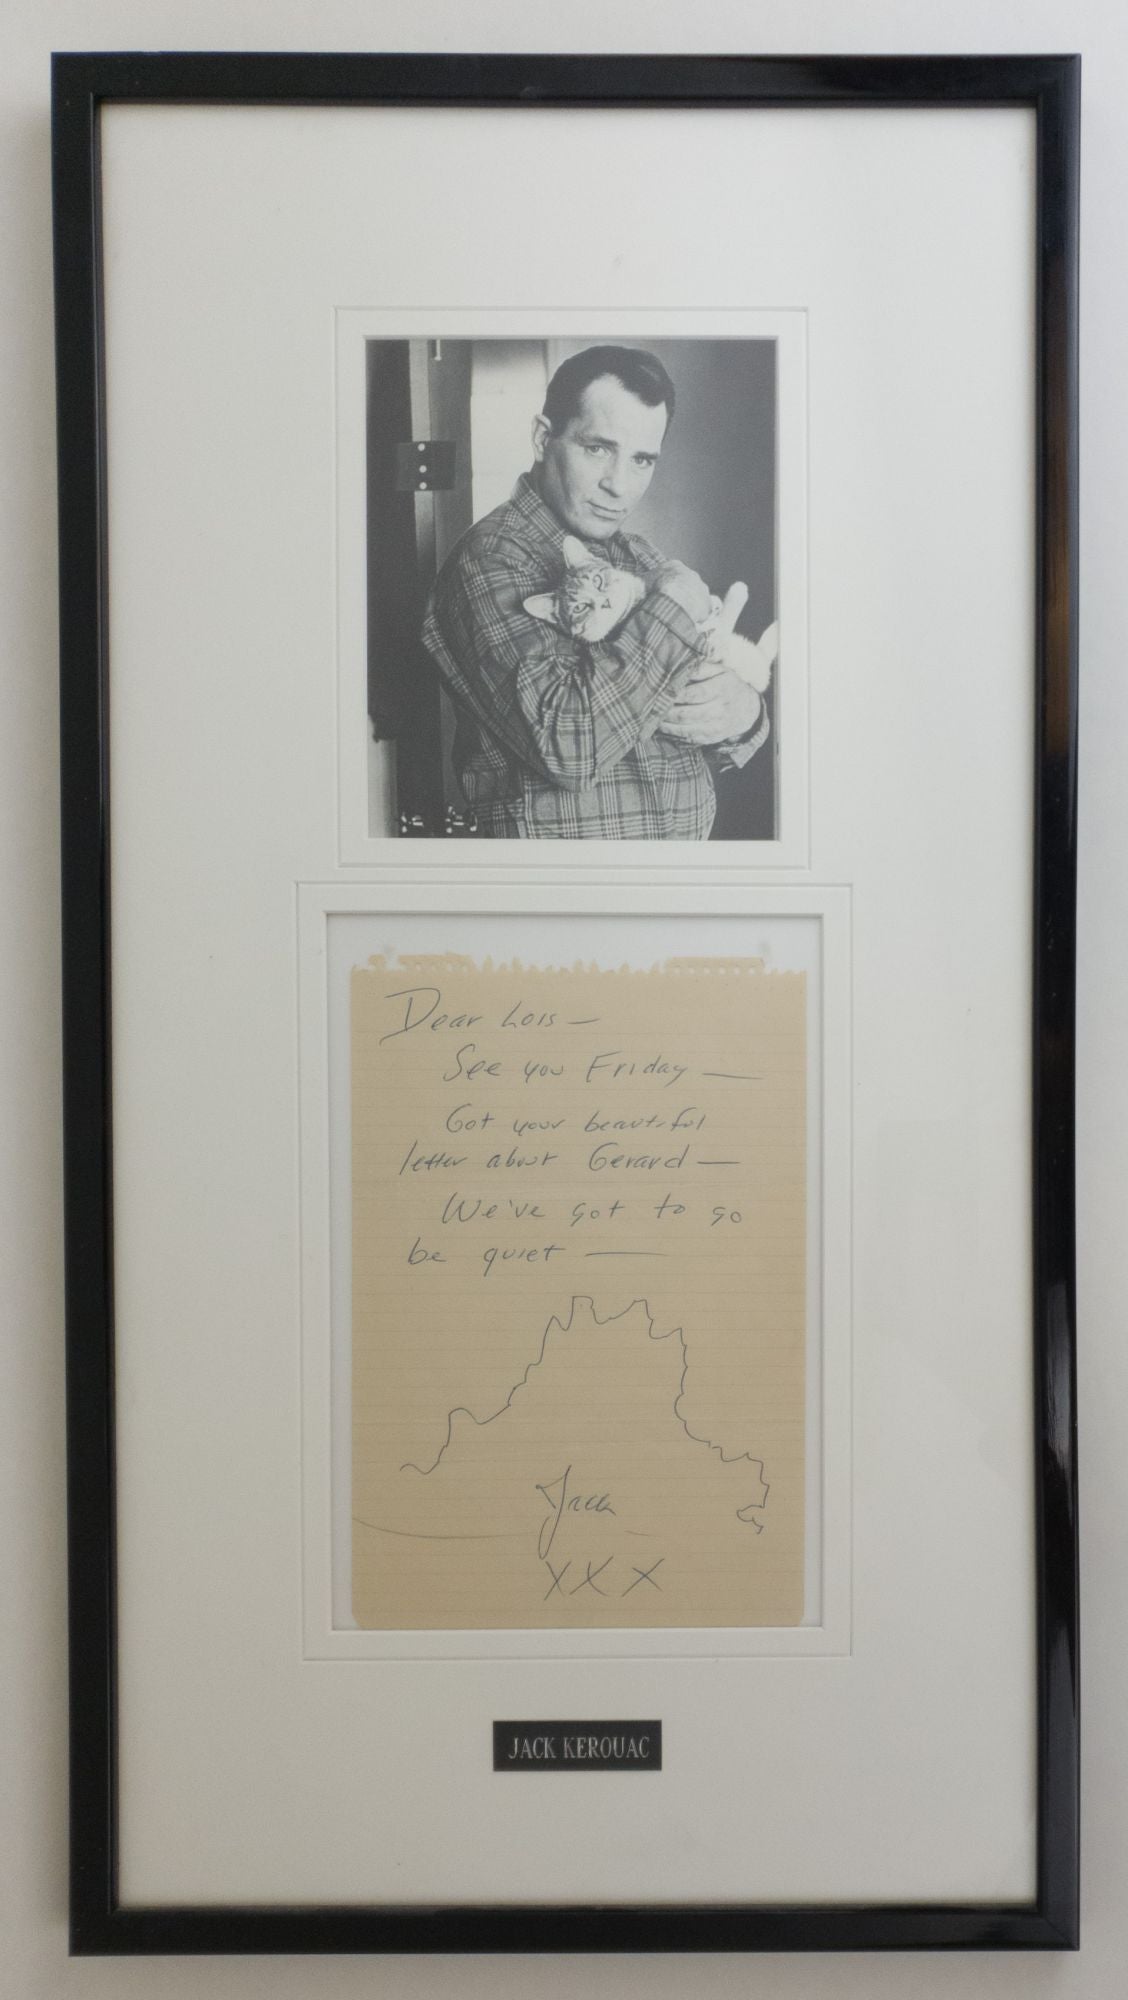 Product Image for FRAMED AUTOGRAPH NOTE SIGNED FROM JACK KEROUAC TO LOIS BECKWITH